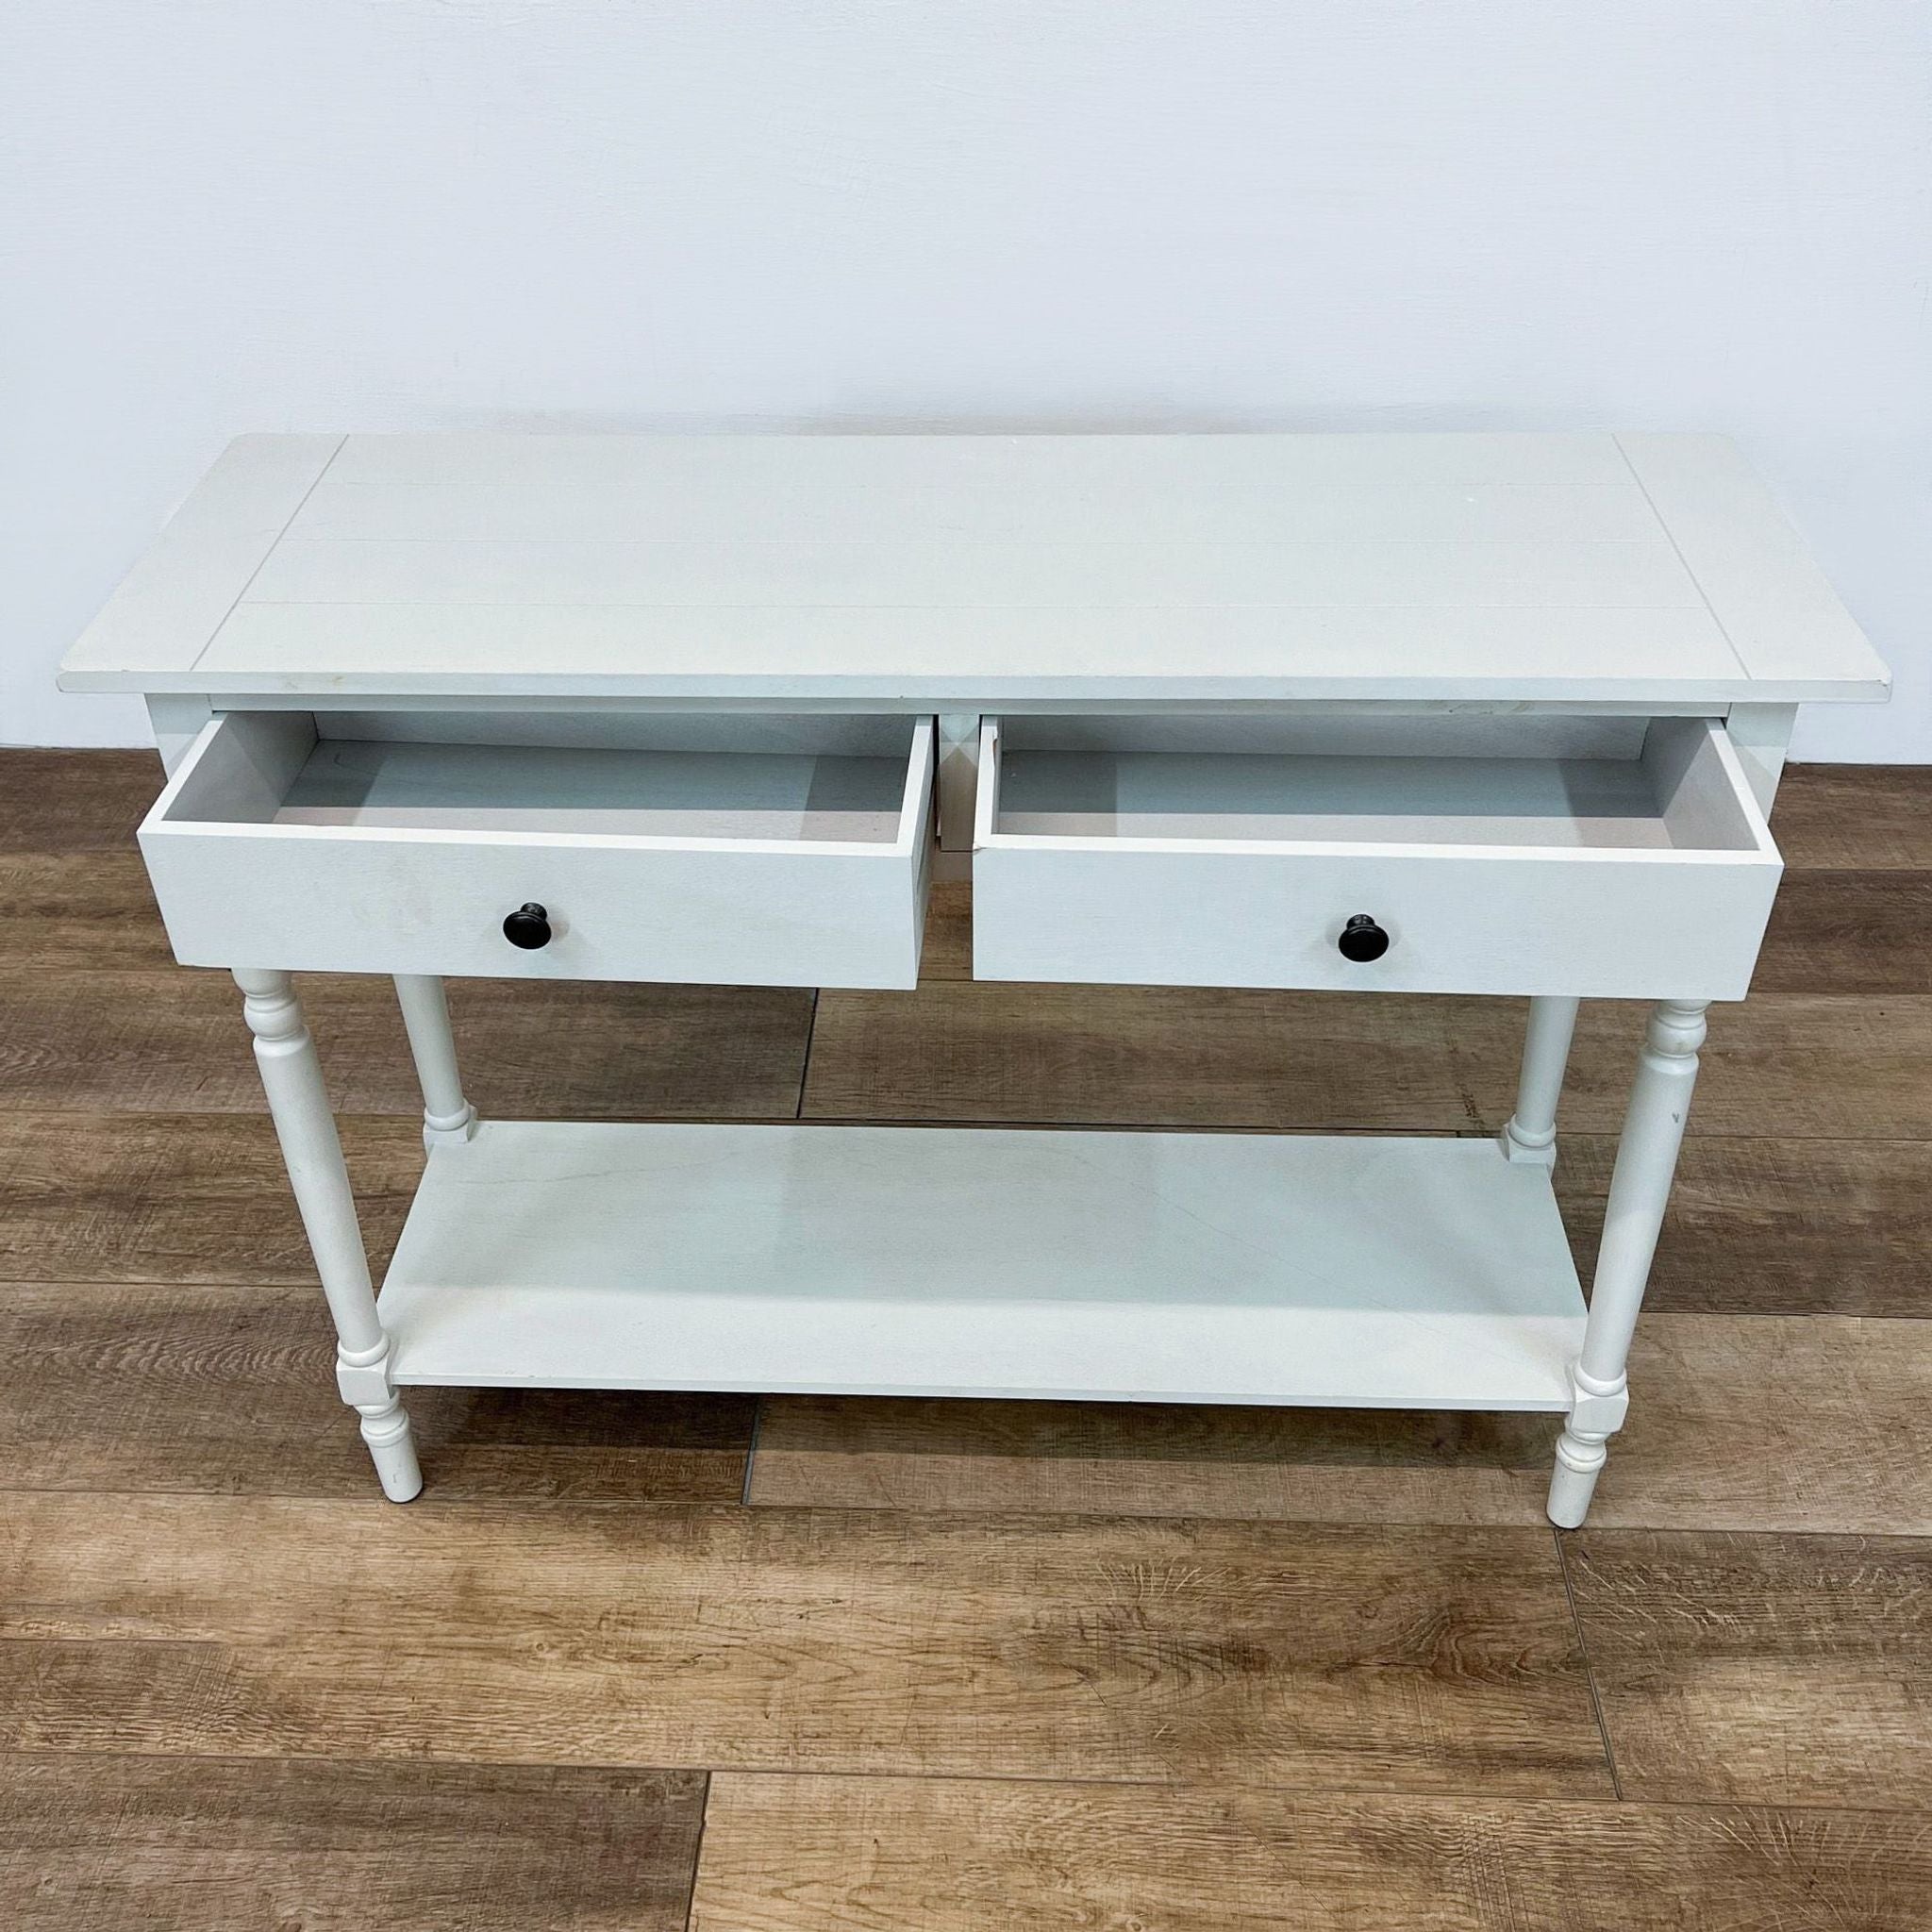 Alt text 2: Open-drawer view of a Reperch side table in light gray, revealing storage space, set on a wood-patterned floor.